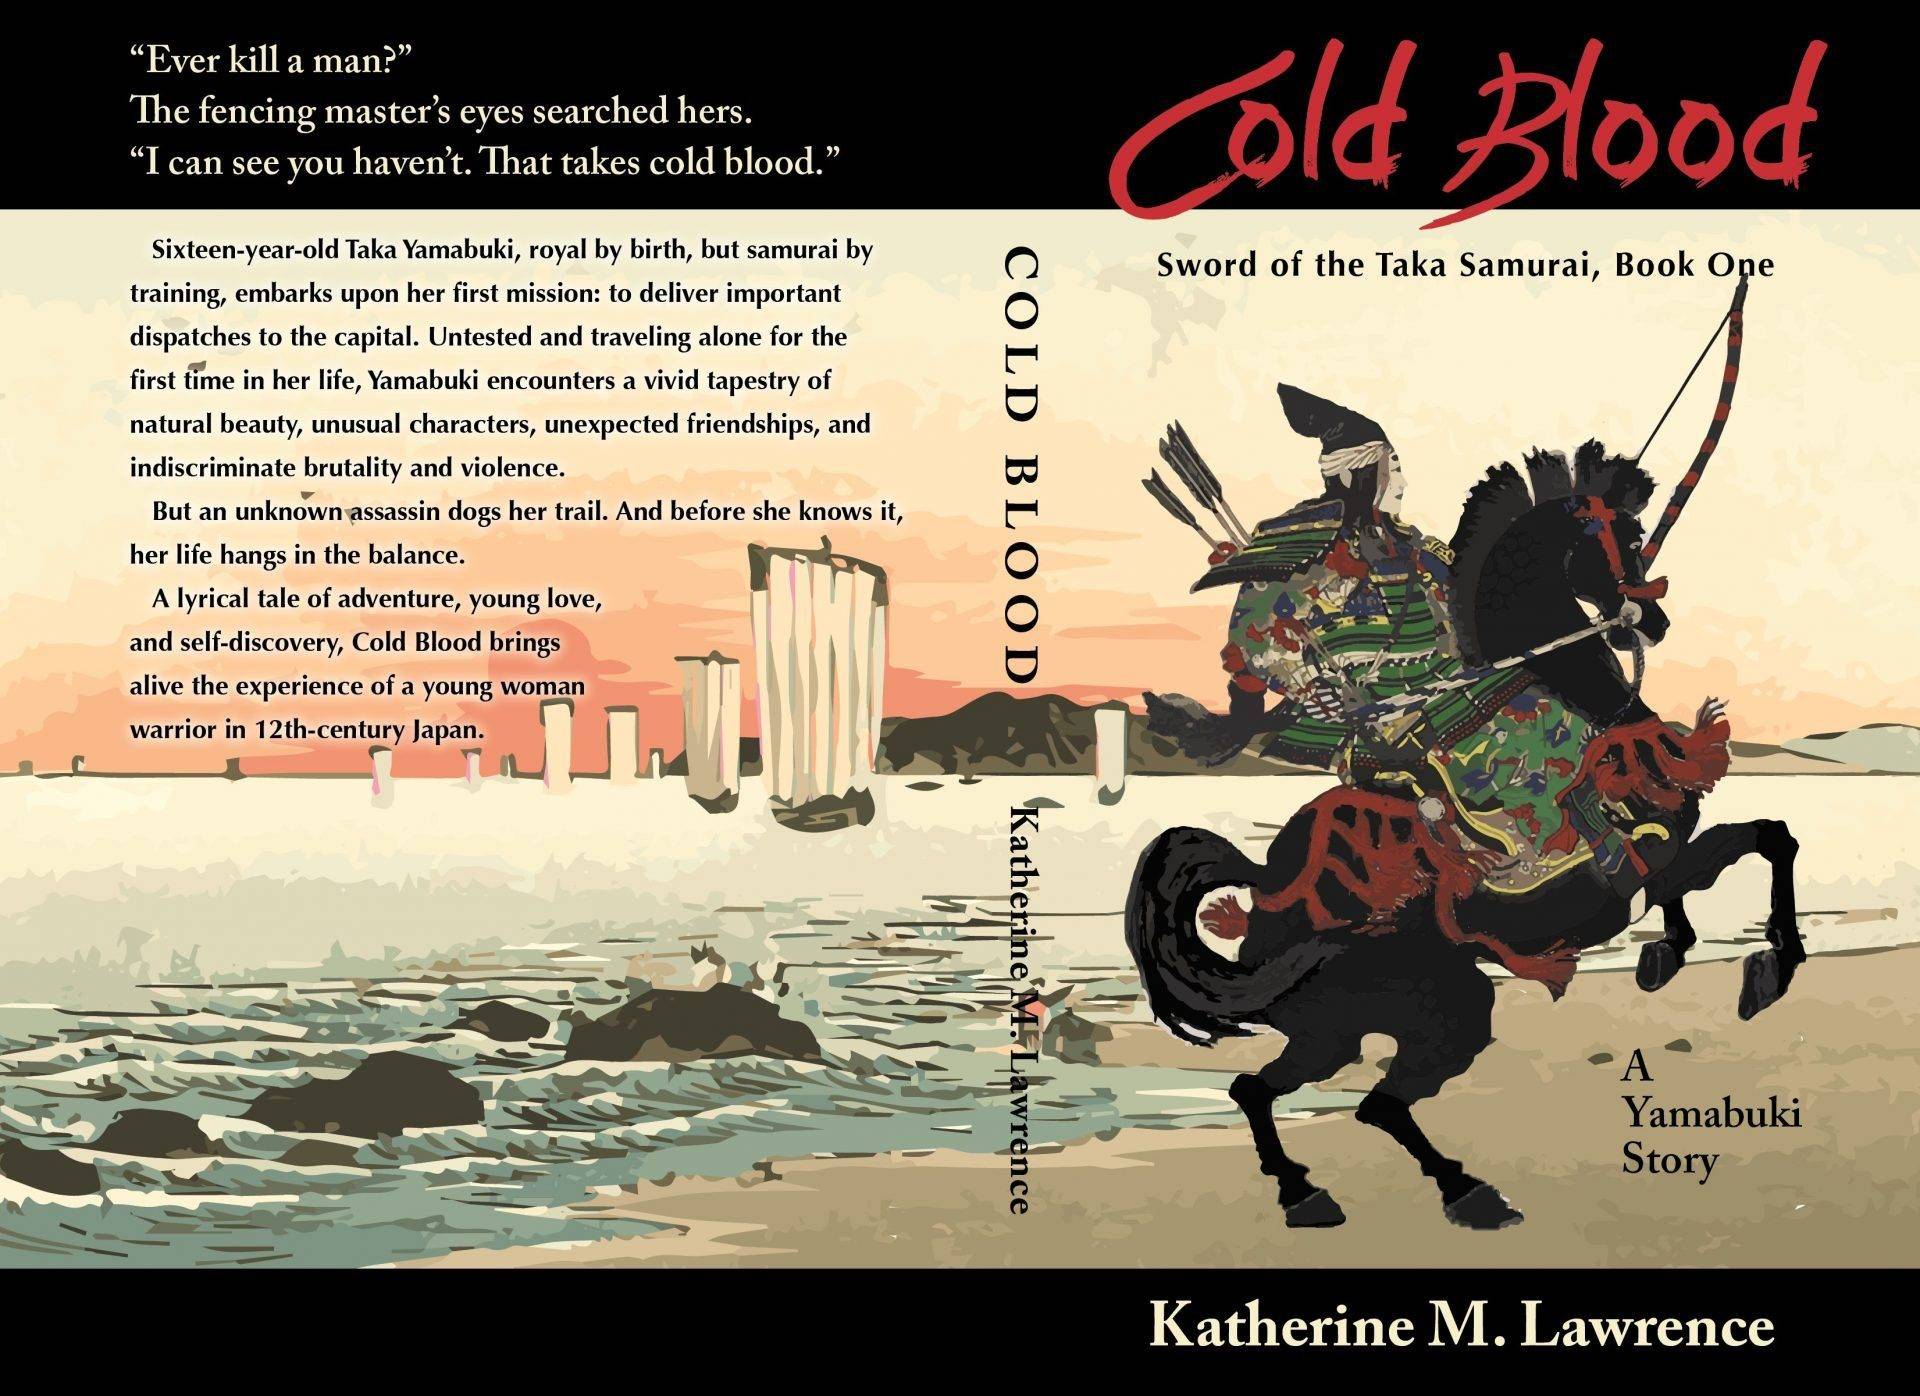 cold-blood-cover-comp-draft-20141122.jpg